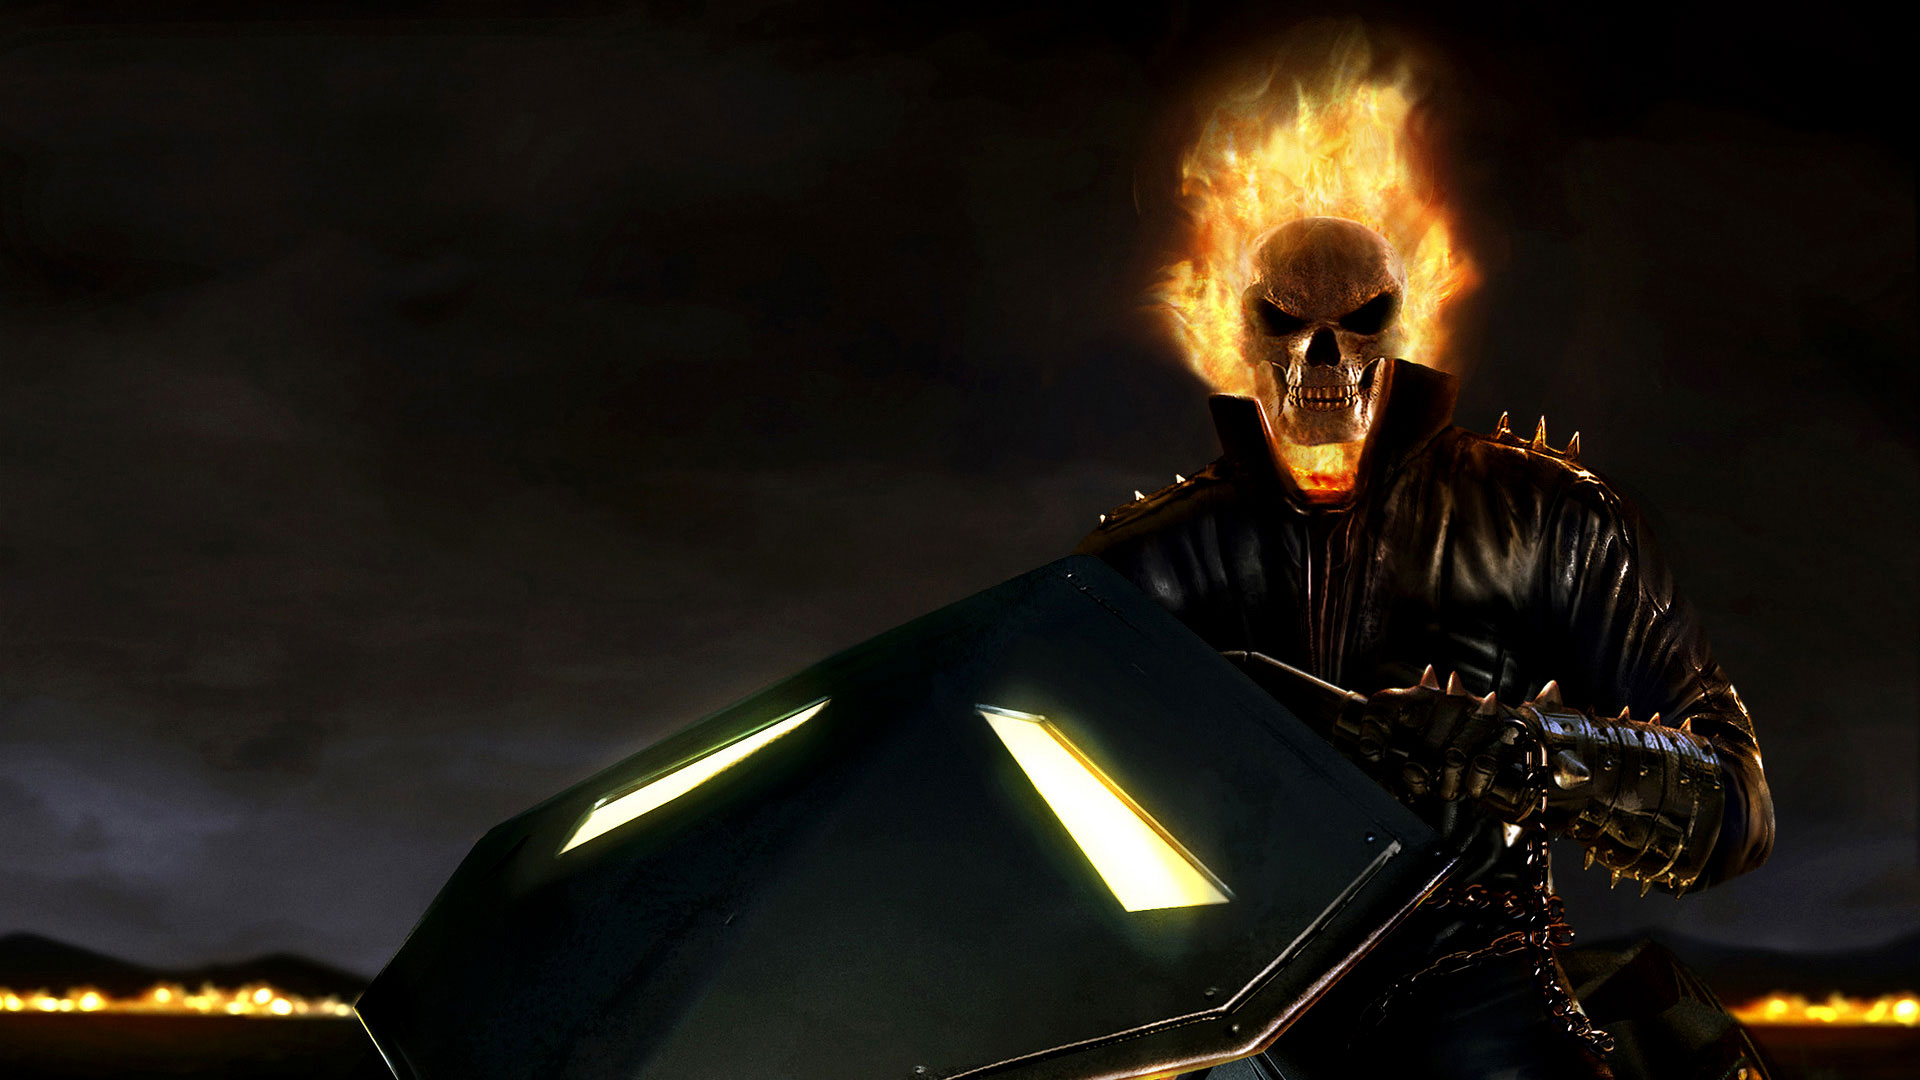 Hd 4k Wallpapers For Pc Ghost Rider - 1920x1080 Wallpaper 